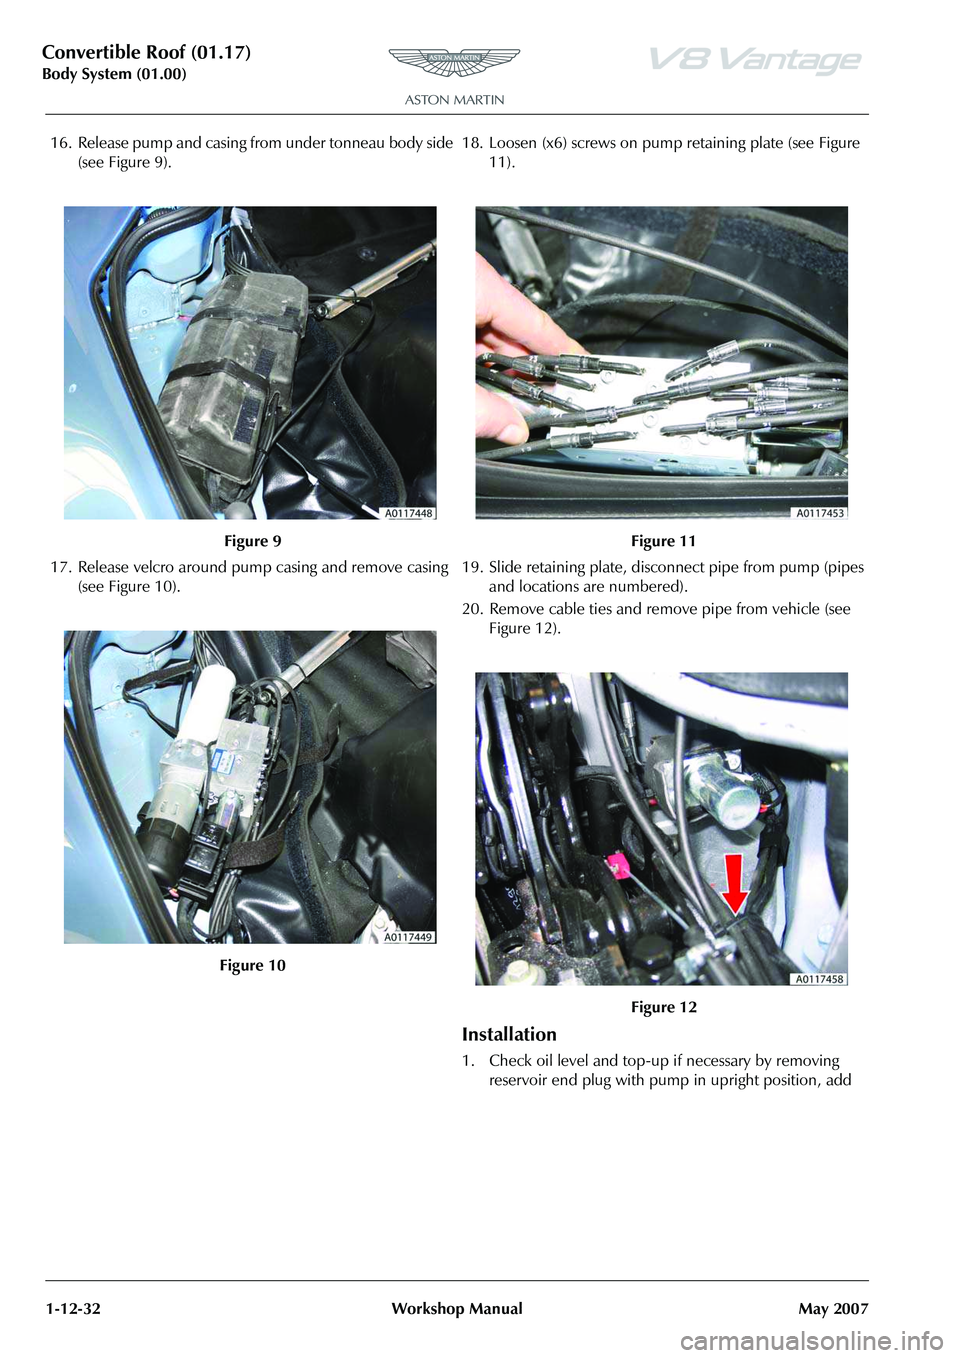 ASTON MARTIN V8 VANTAGE 2010  Workshop Manual Convertible Roof (01.17)
Body System (01.00)1-12-32 Workshop Manual May 2007
16. Release pump and casing from under tonneau body side  (see Figure 9).
17. Release velcro around pu mp casing and remove